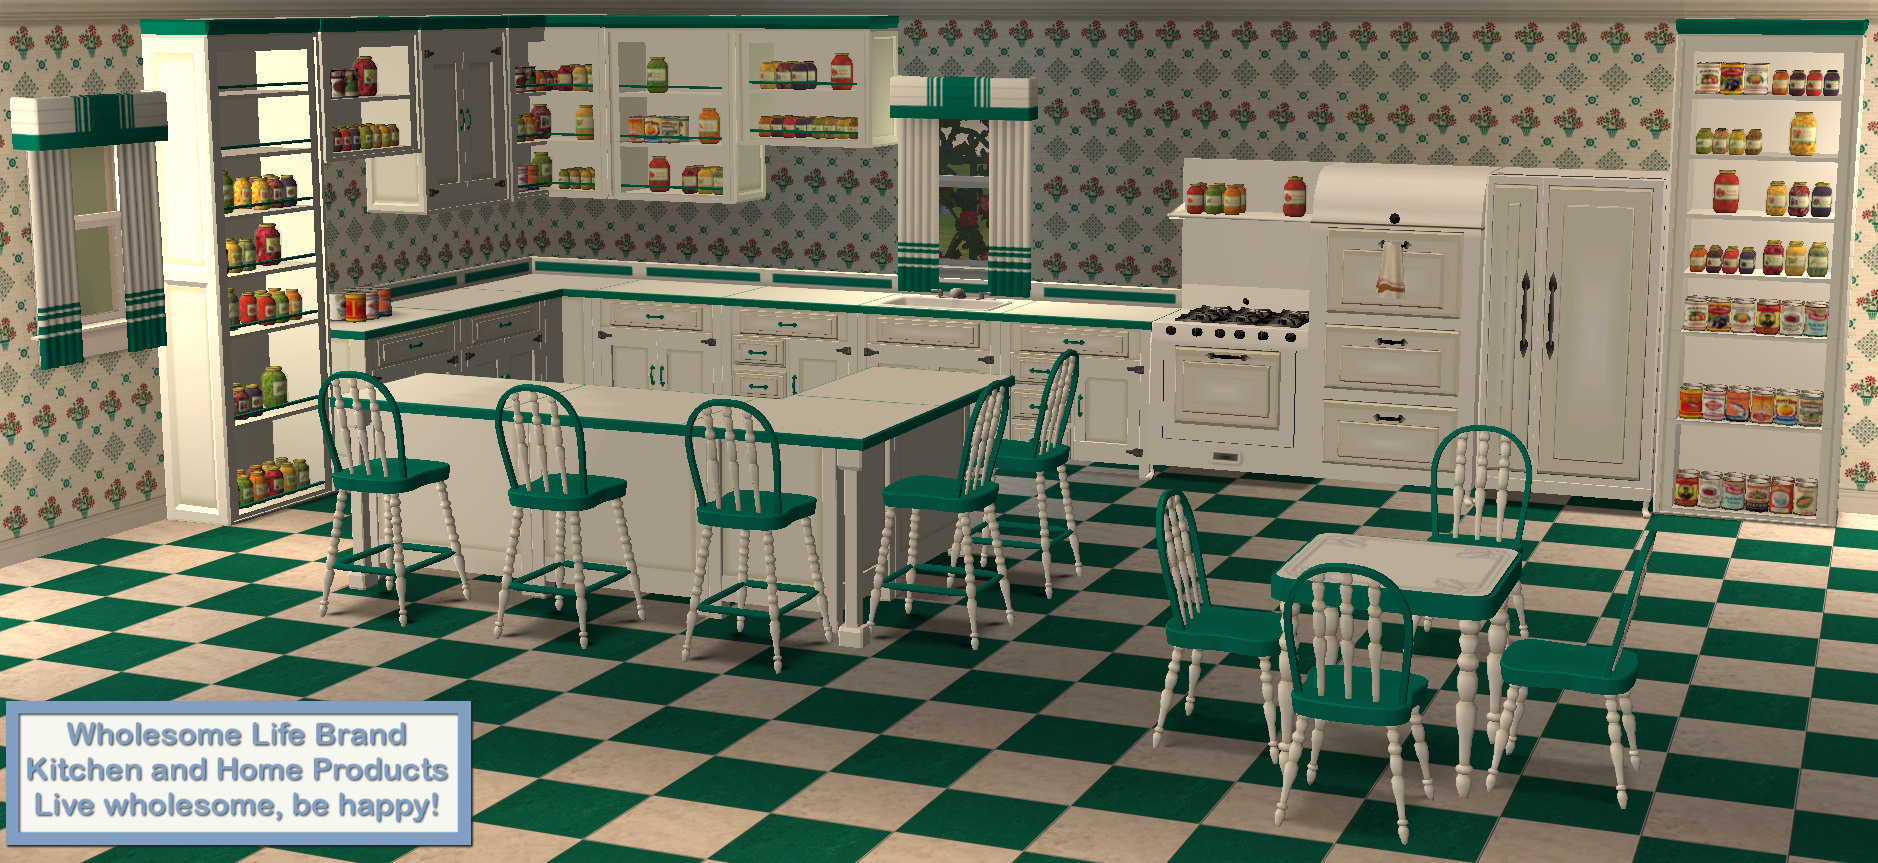 Mod The Sims Wholesome Life Brand 1930 S Kitchen Counters And Cabinets Set